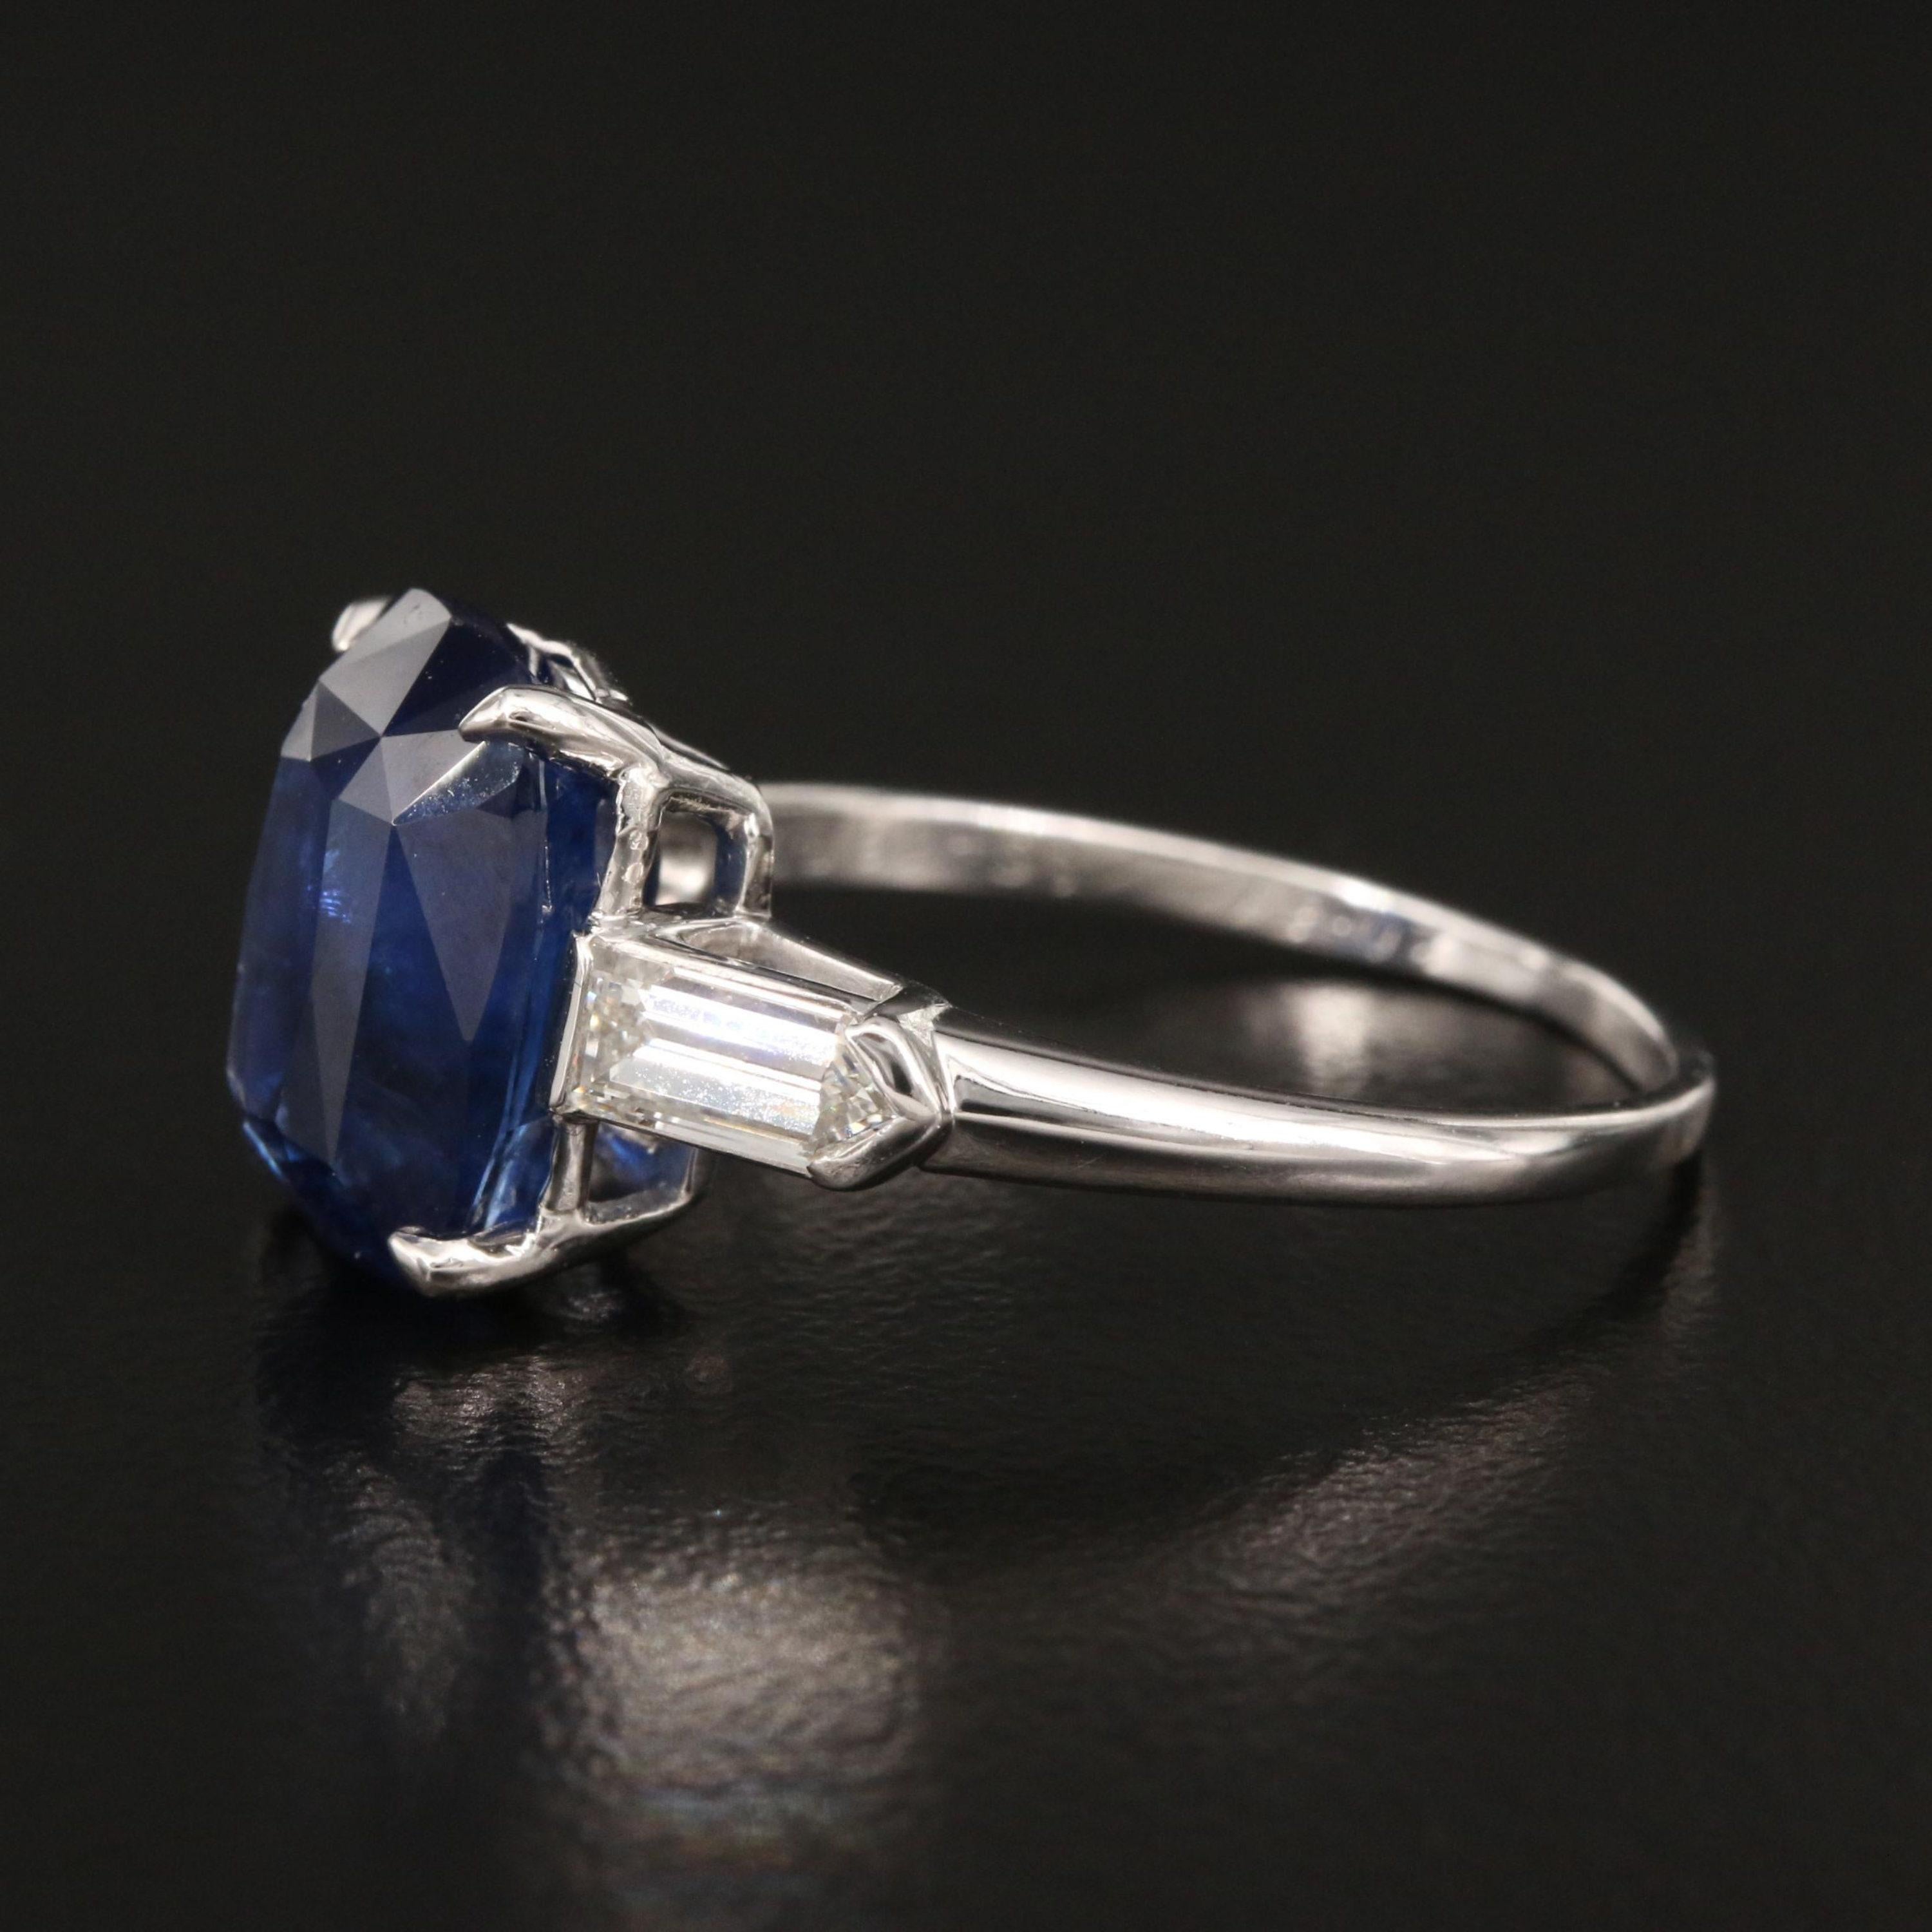 For Sale:  5 Carat Sapphire and Diamond Engagement Ring, White Gold Three Stone Ring 5